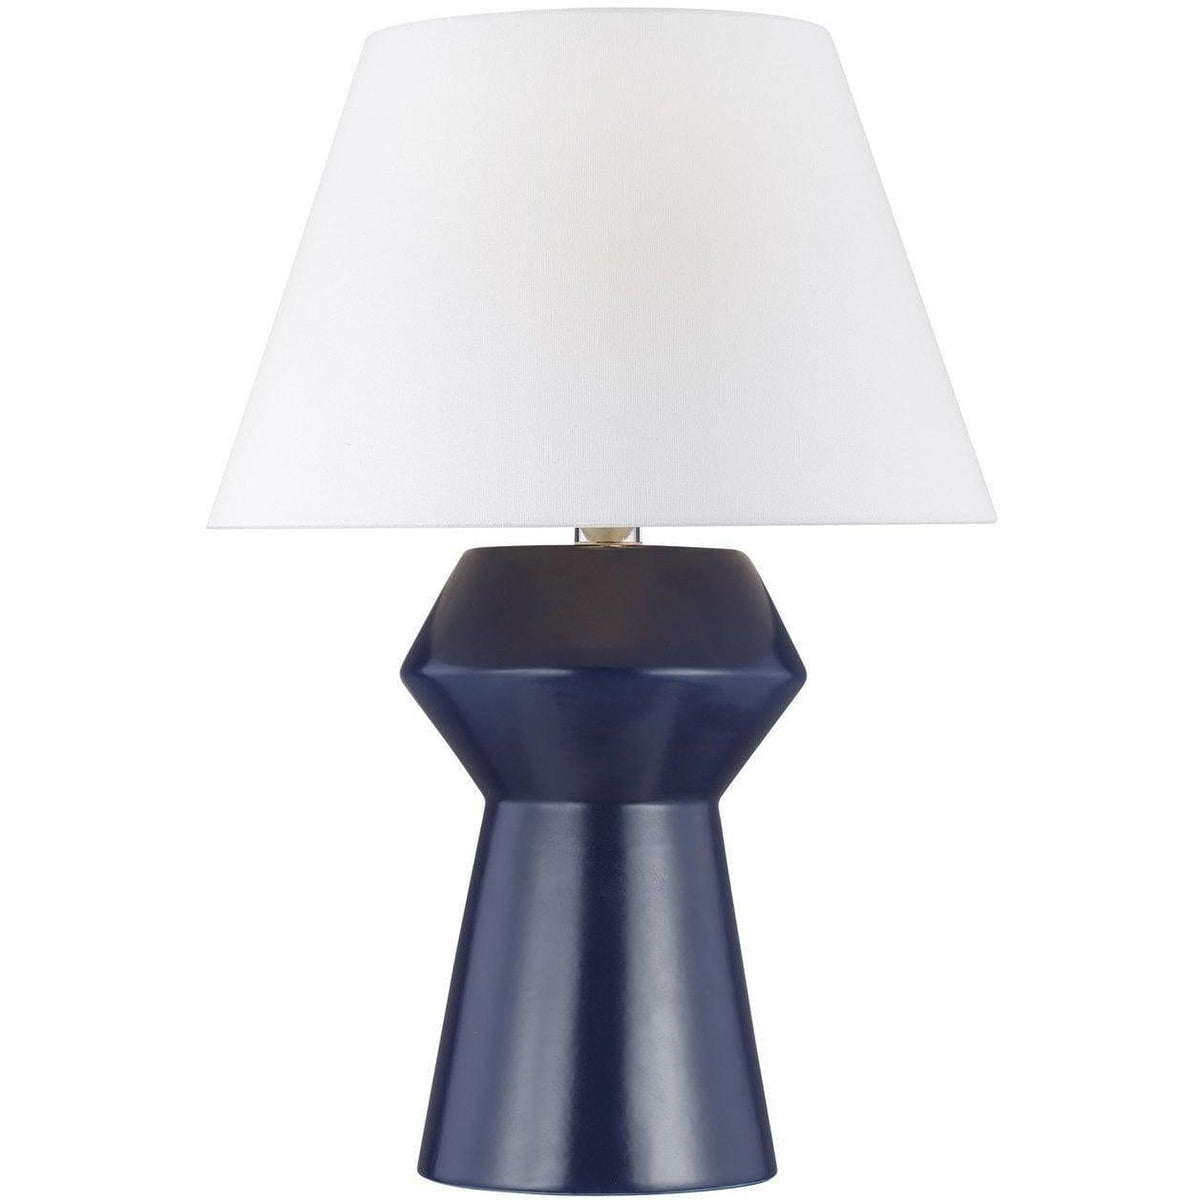 Visual Comfort Studio Collection - Abaco Inverted Table Lamp - CT1061INDPN1 | Montreal Lighting & Hardware